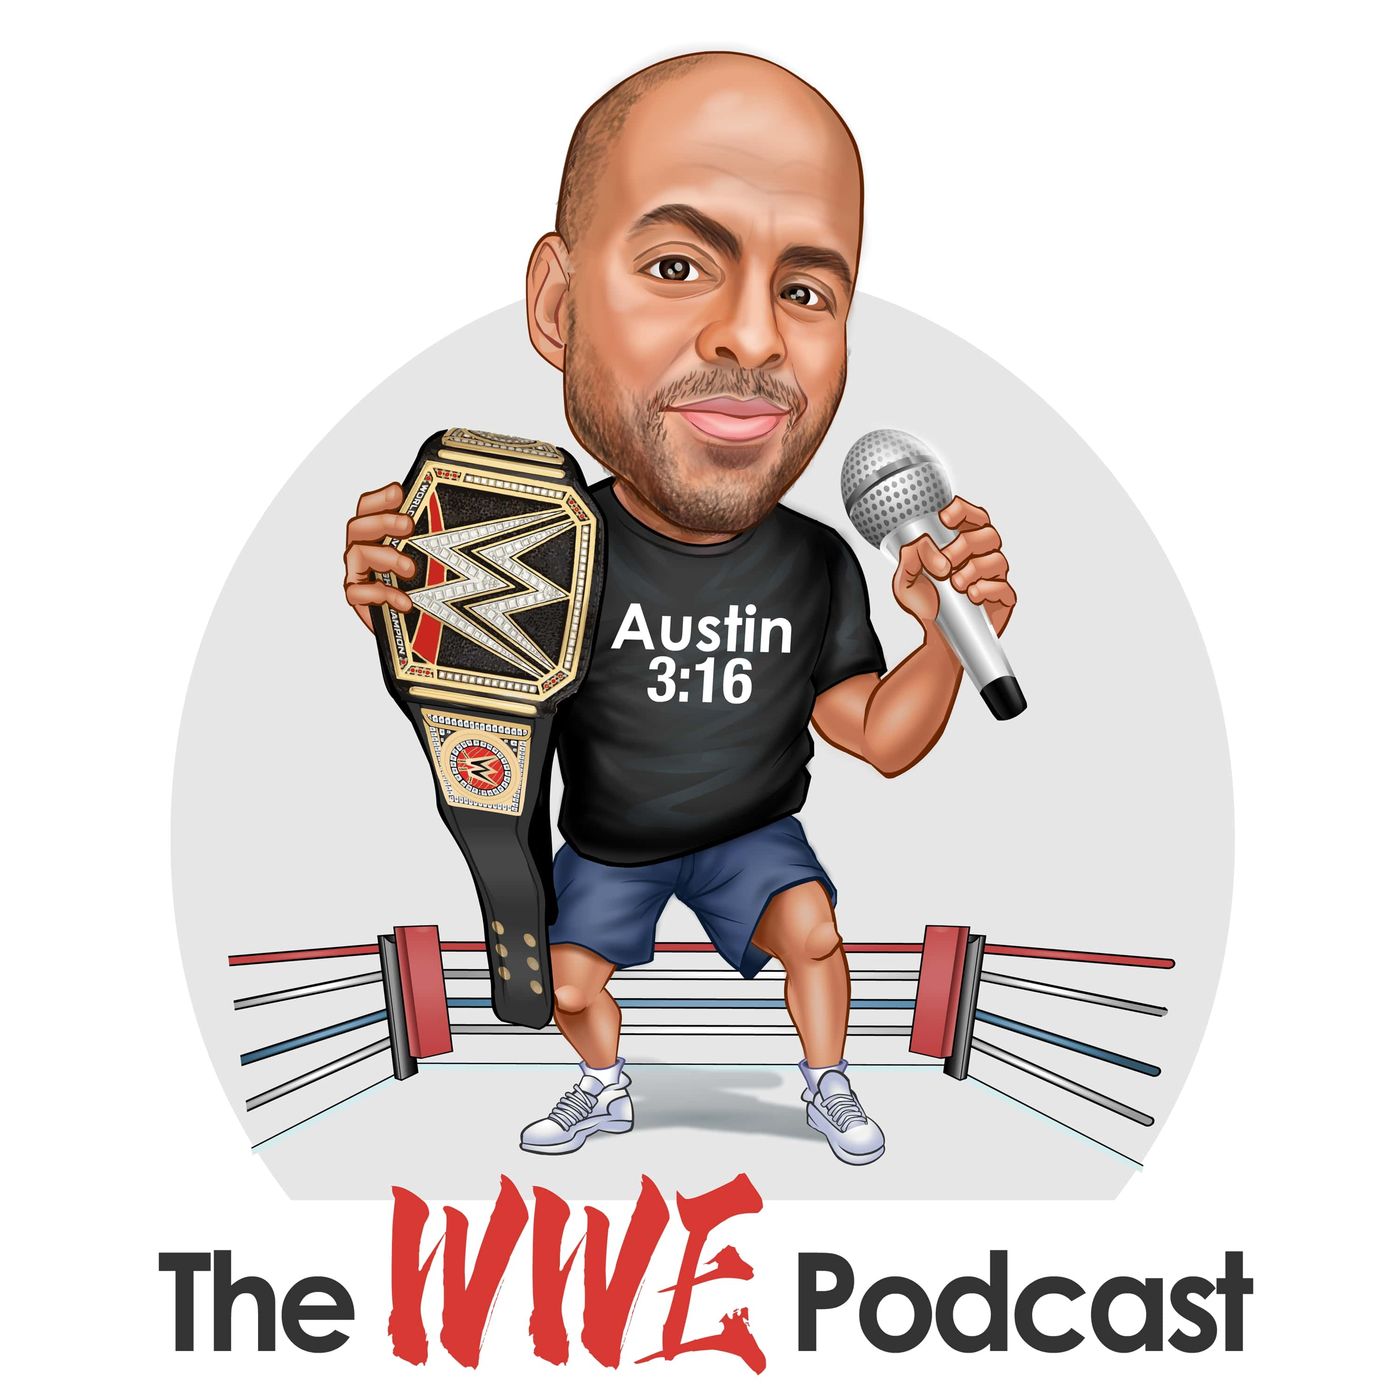 The WWE Podcast podcast